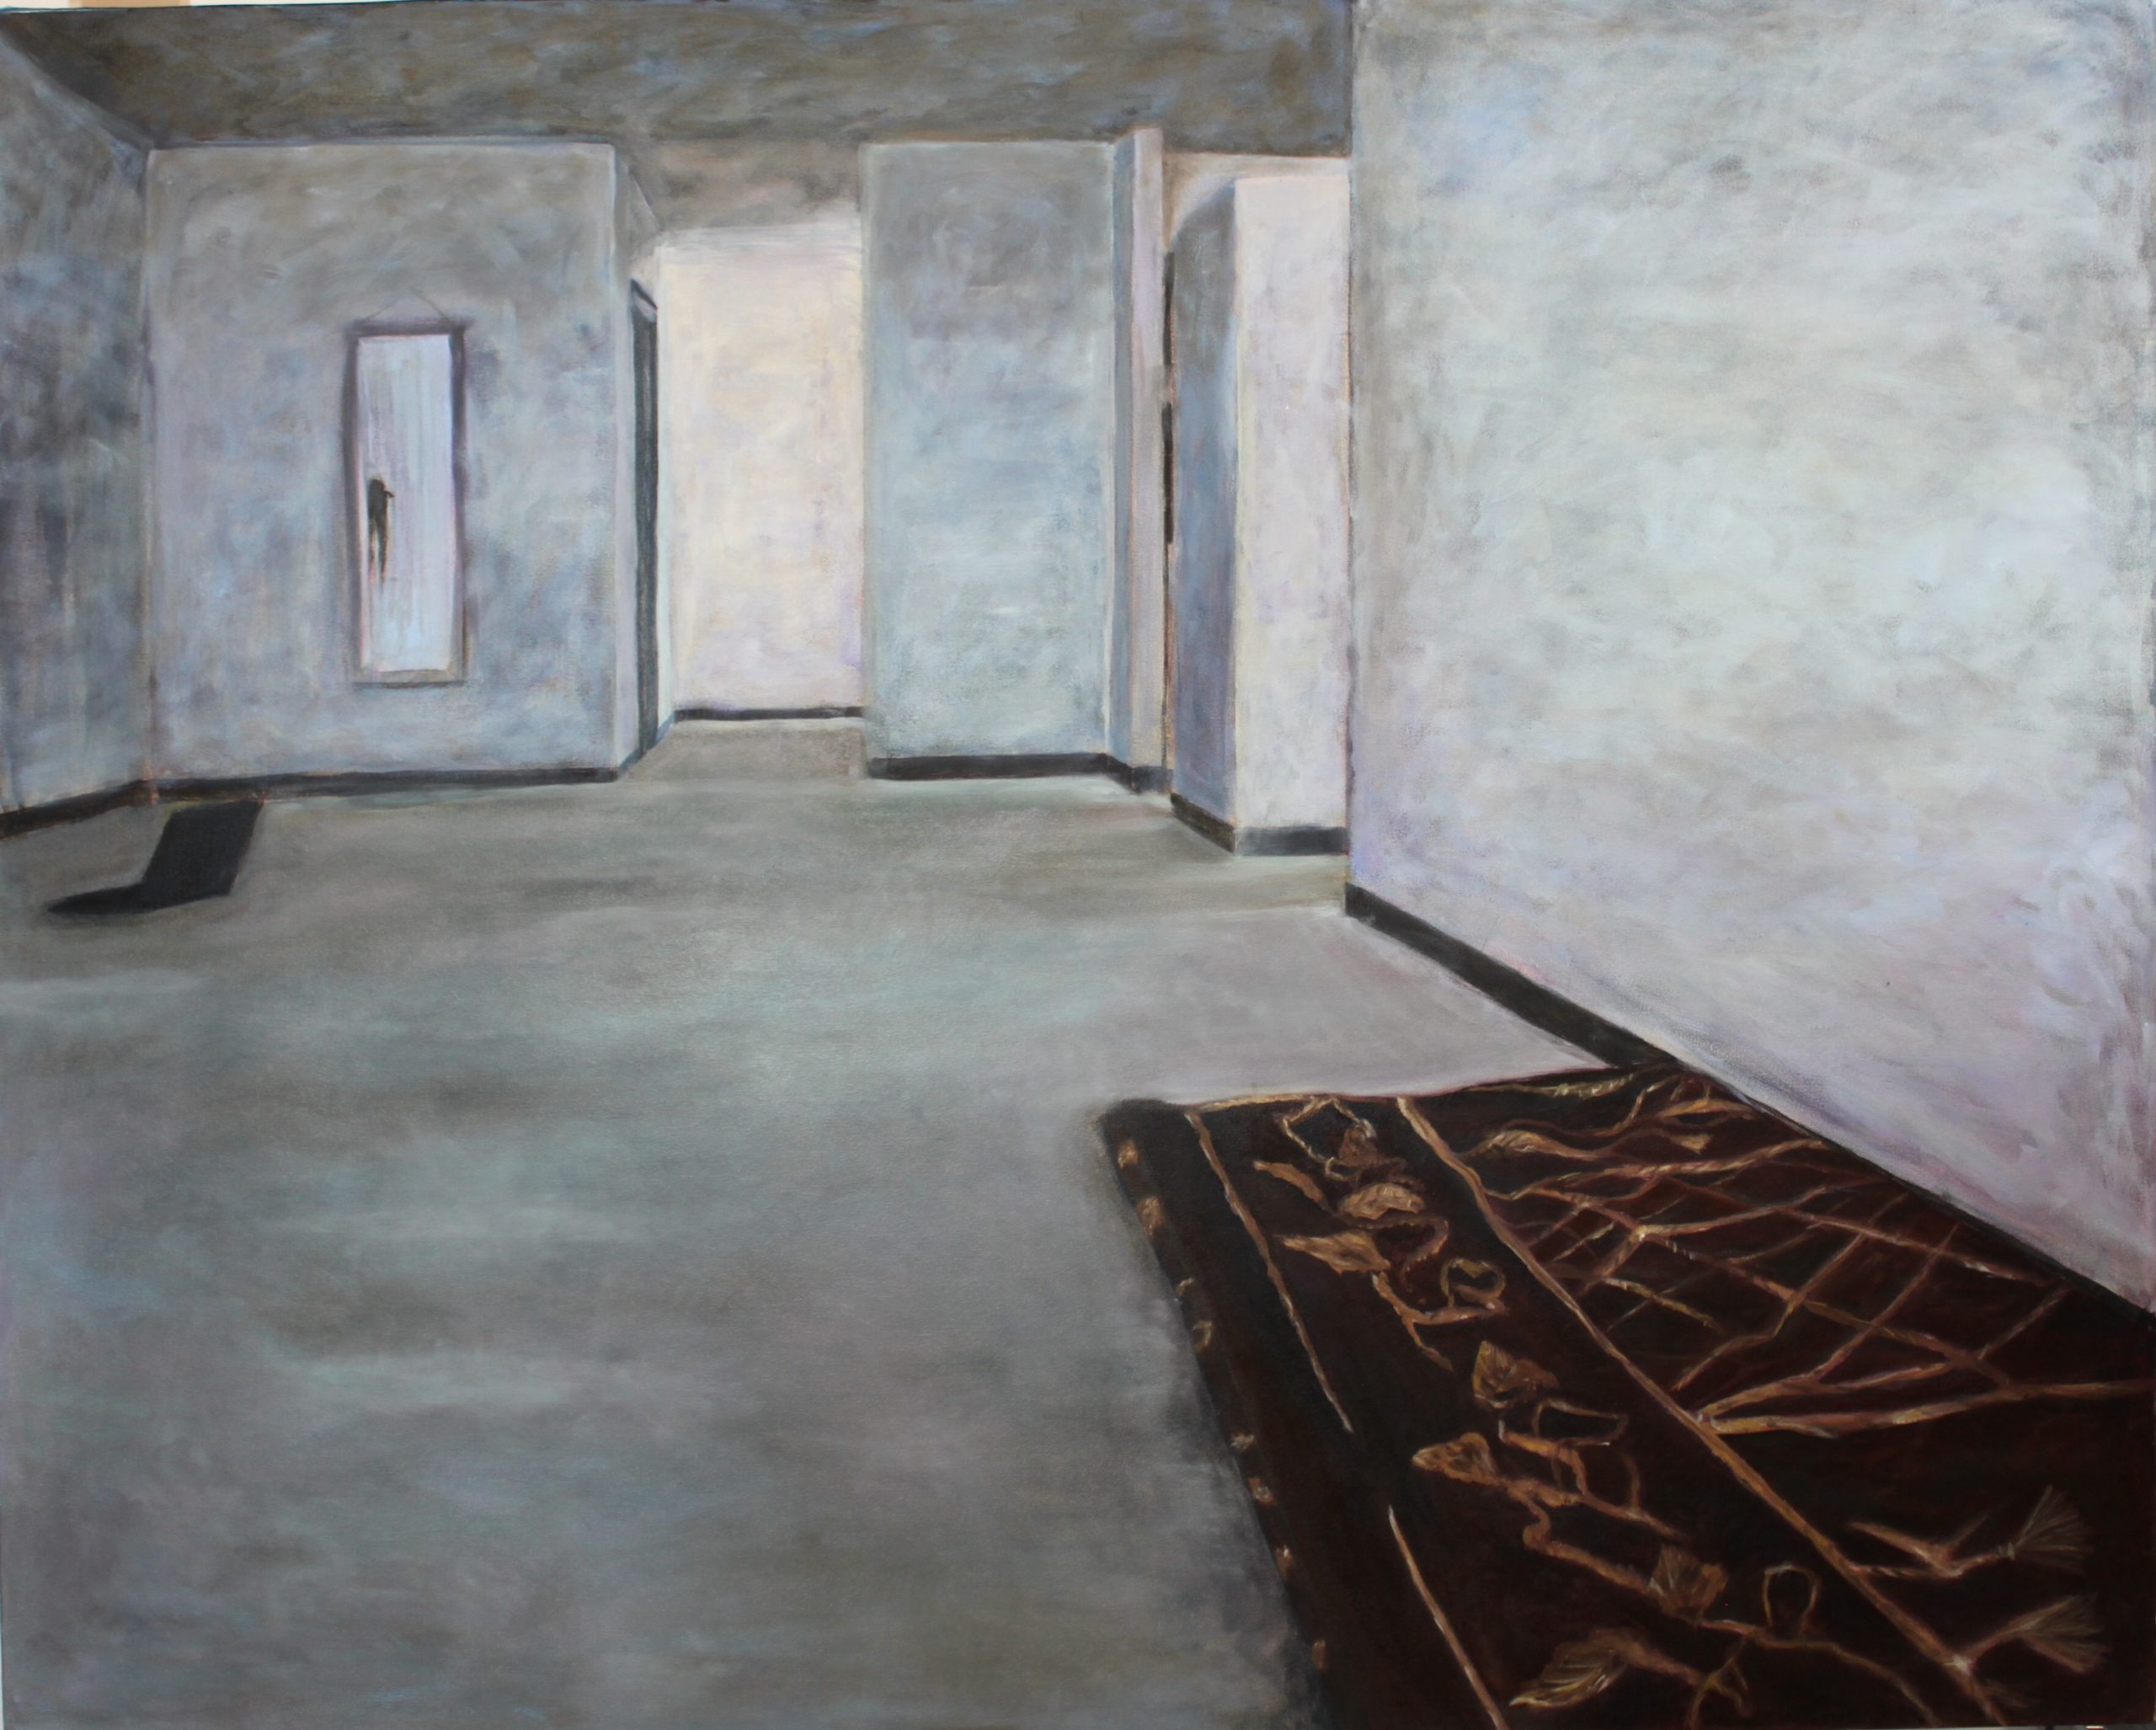 <small>Madhu Kumar (b. 1963), Let me be more, 2014, oil on canvas, 48″ x 60″. University of Regina President’s Art Collection; pc.2015.25. © Madhu Kumar. Reproduced with permission.
</small>